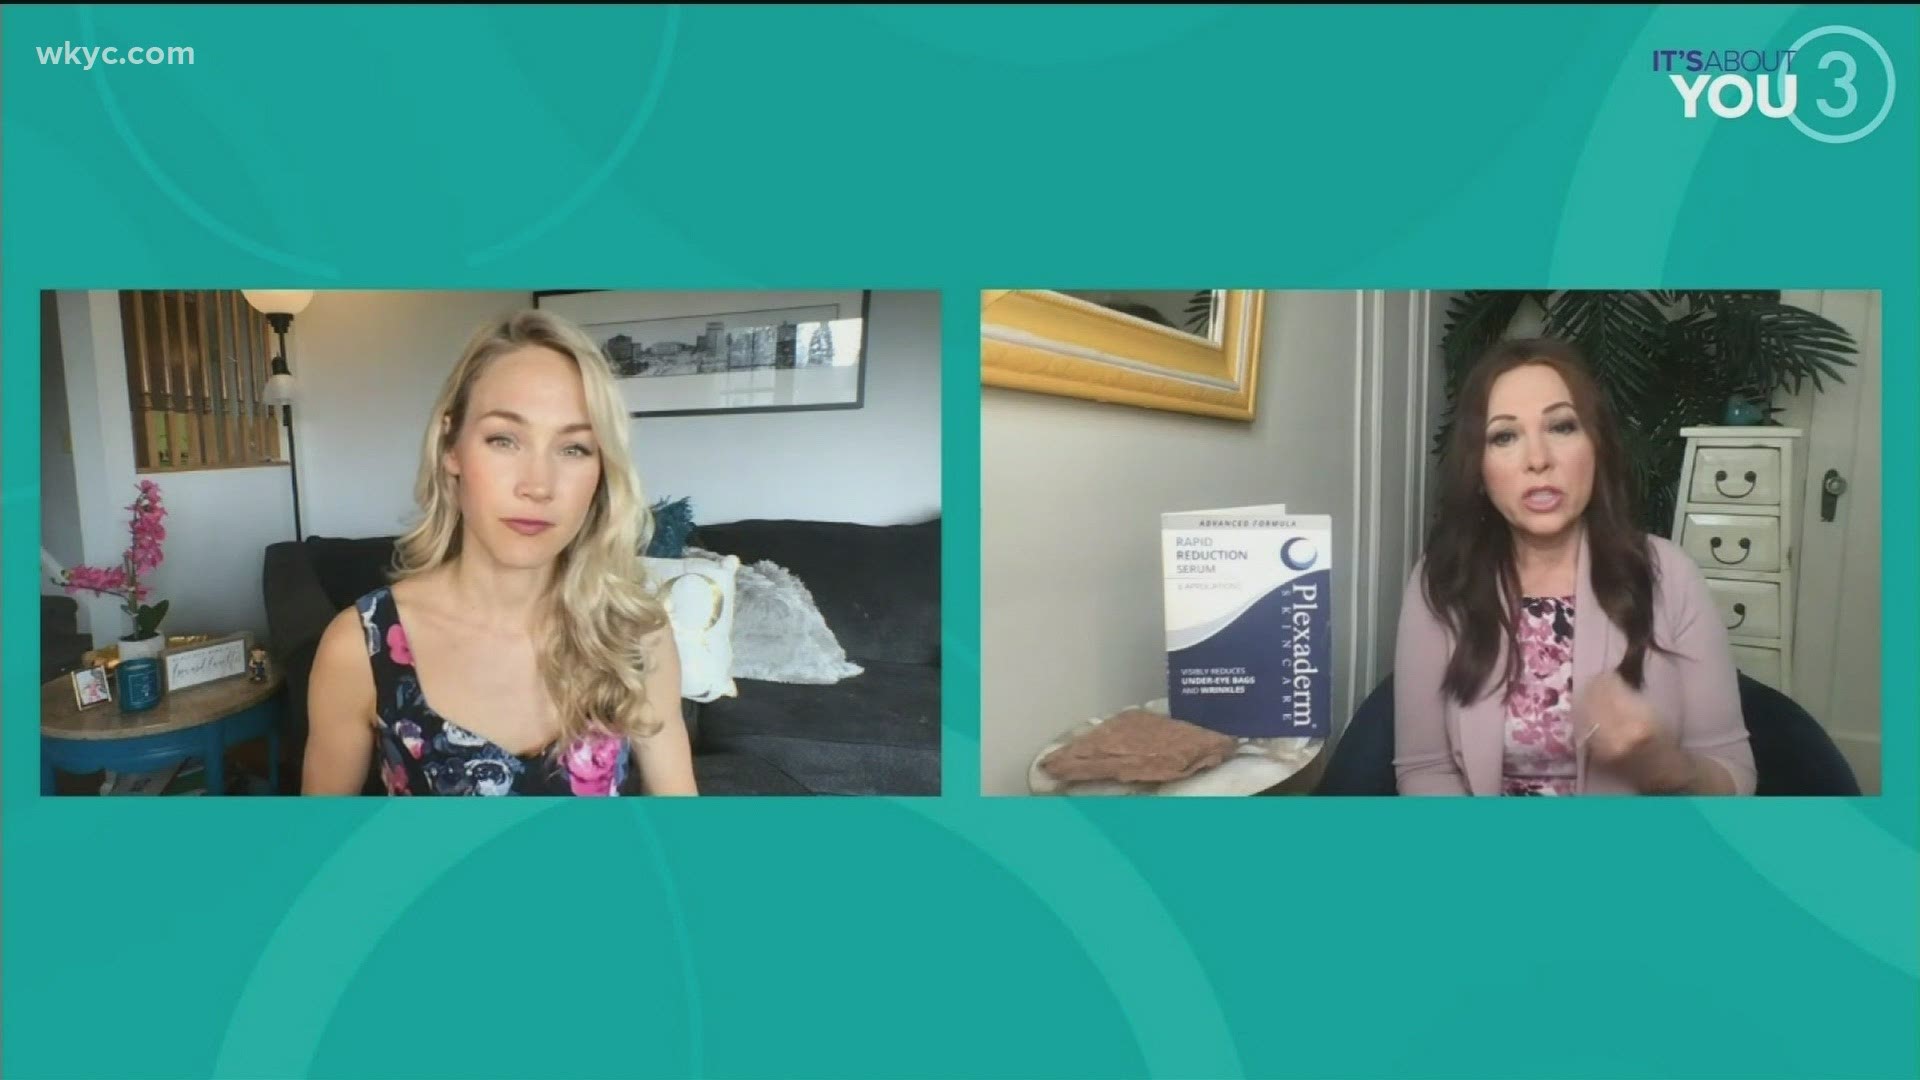 Melinda Mckinsey joins Alexa today to talk about Plexaderm! The amazing new product that reduces wrinkles and signs of aging in just 10 minutes!